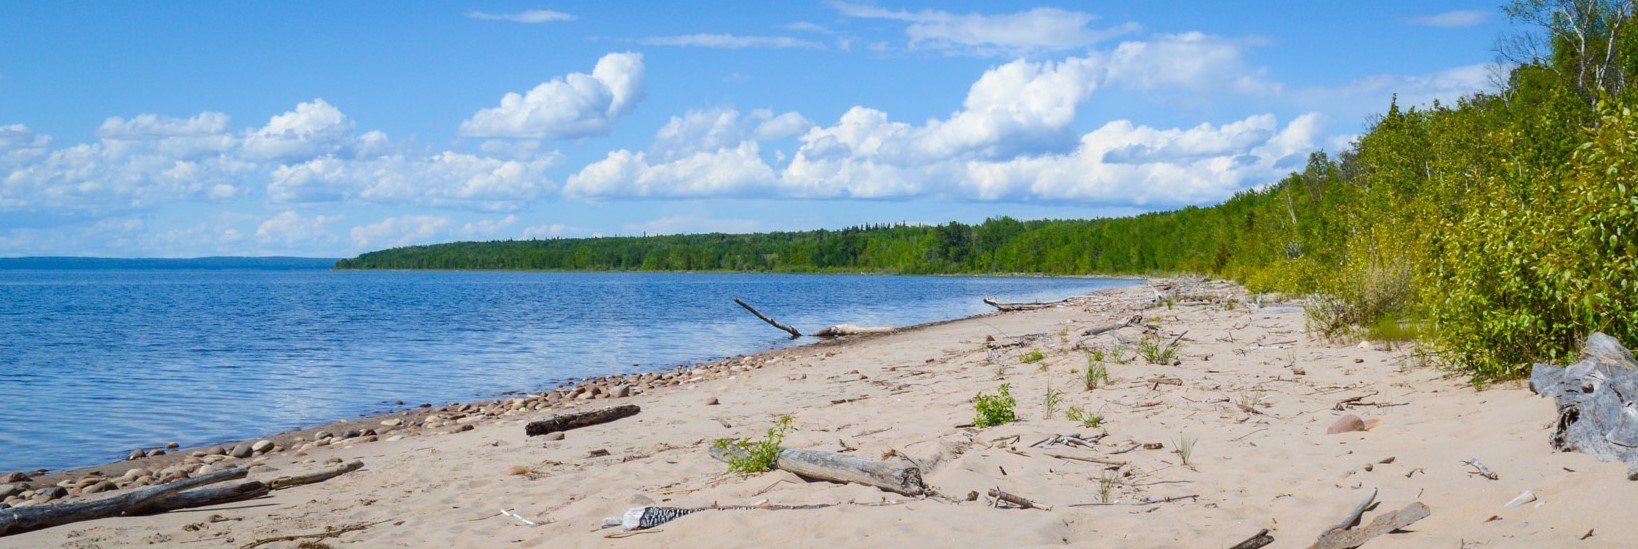 20-astounding-facts-about-lesser-slave-lake